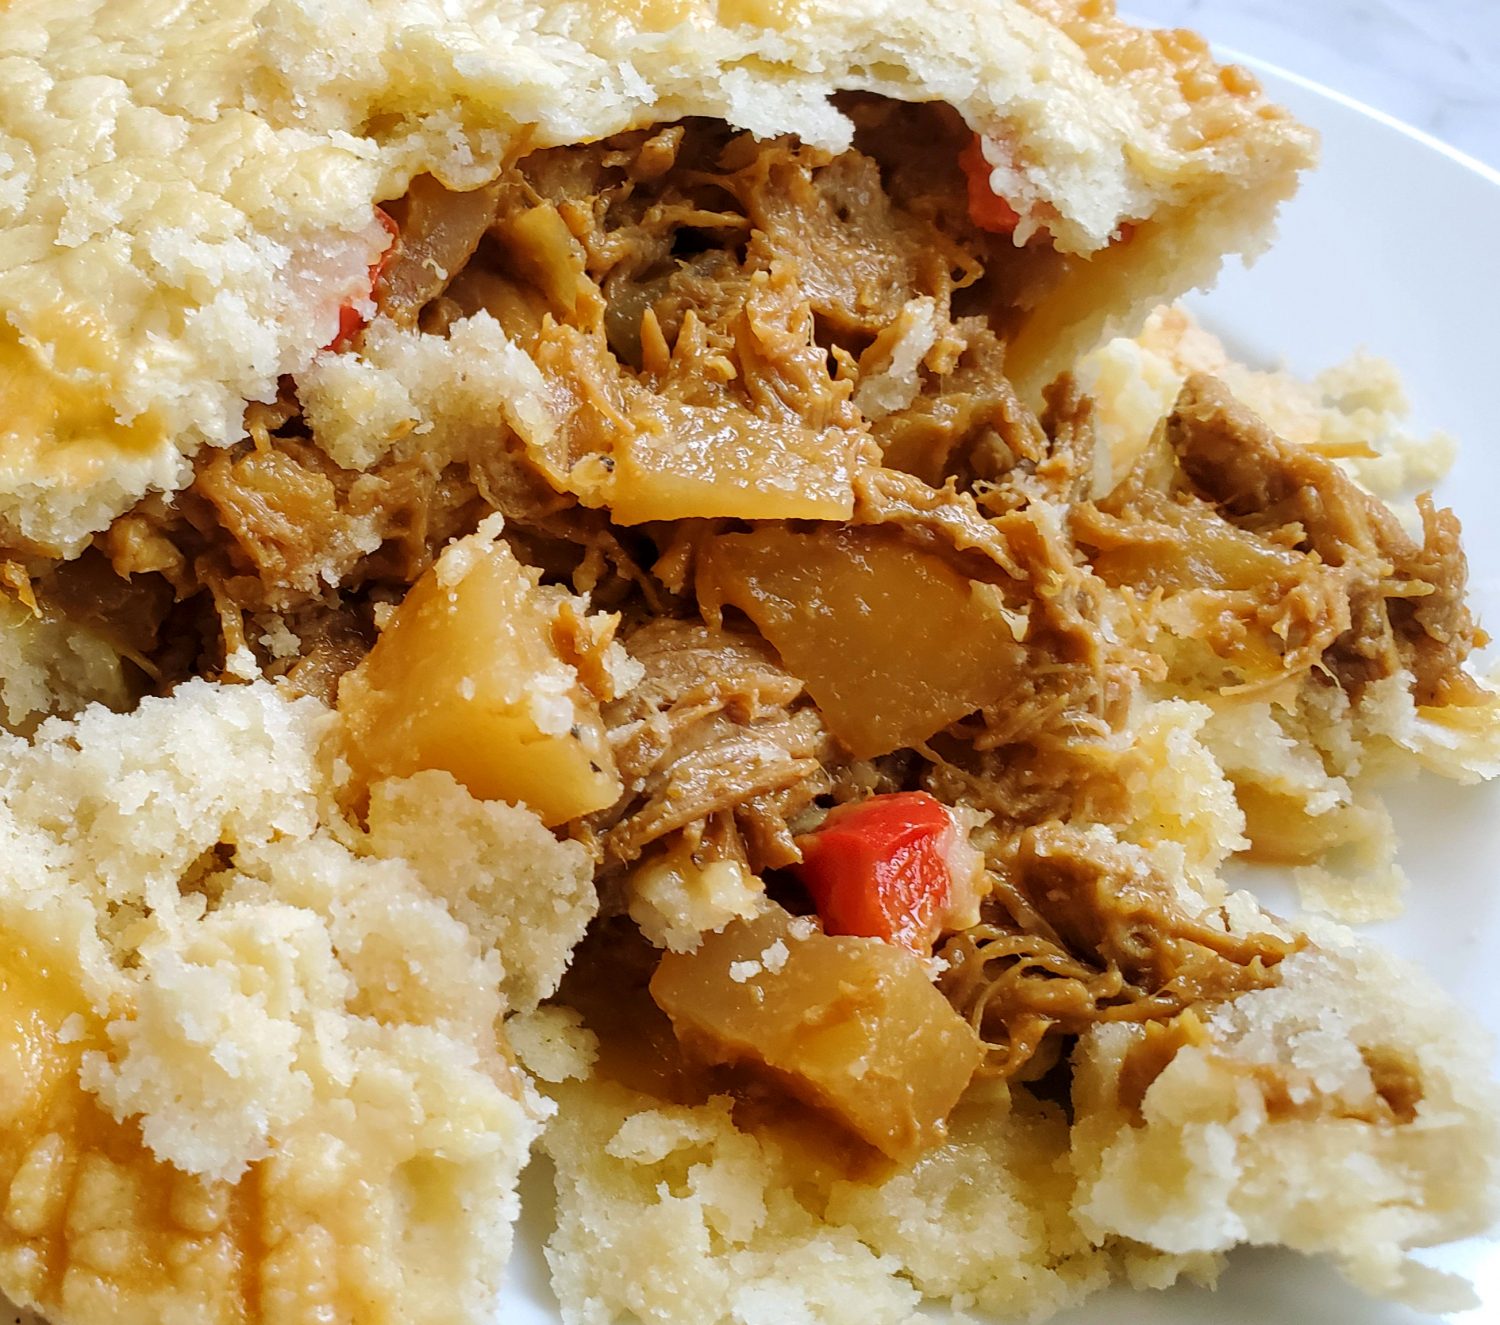 Smoky roasted pulled pork with chopped apples, potatoes baked with a tangy-sweet Carolina BBQ sauce, and ultra flaky English Wig pie crust.  